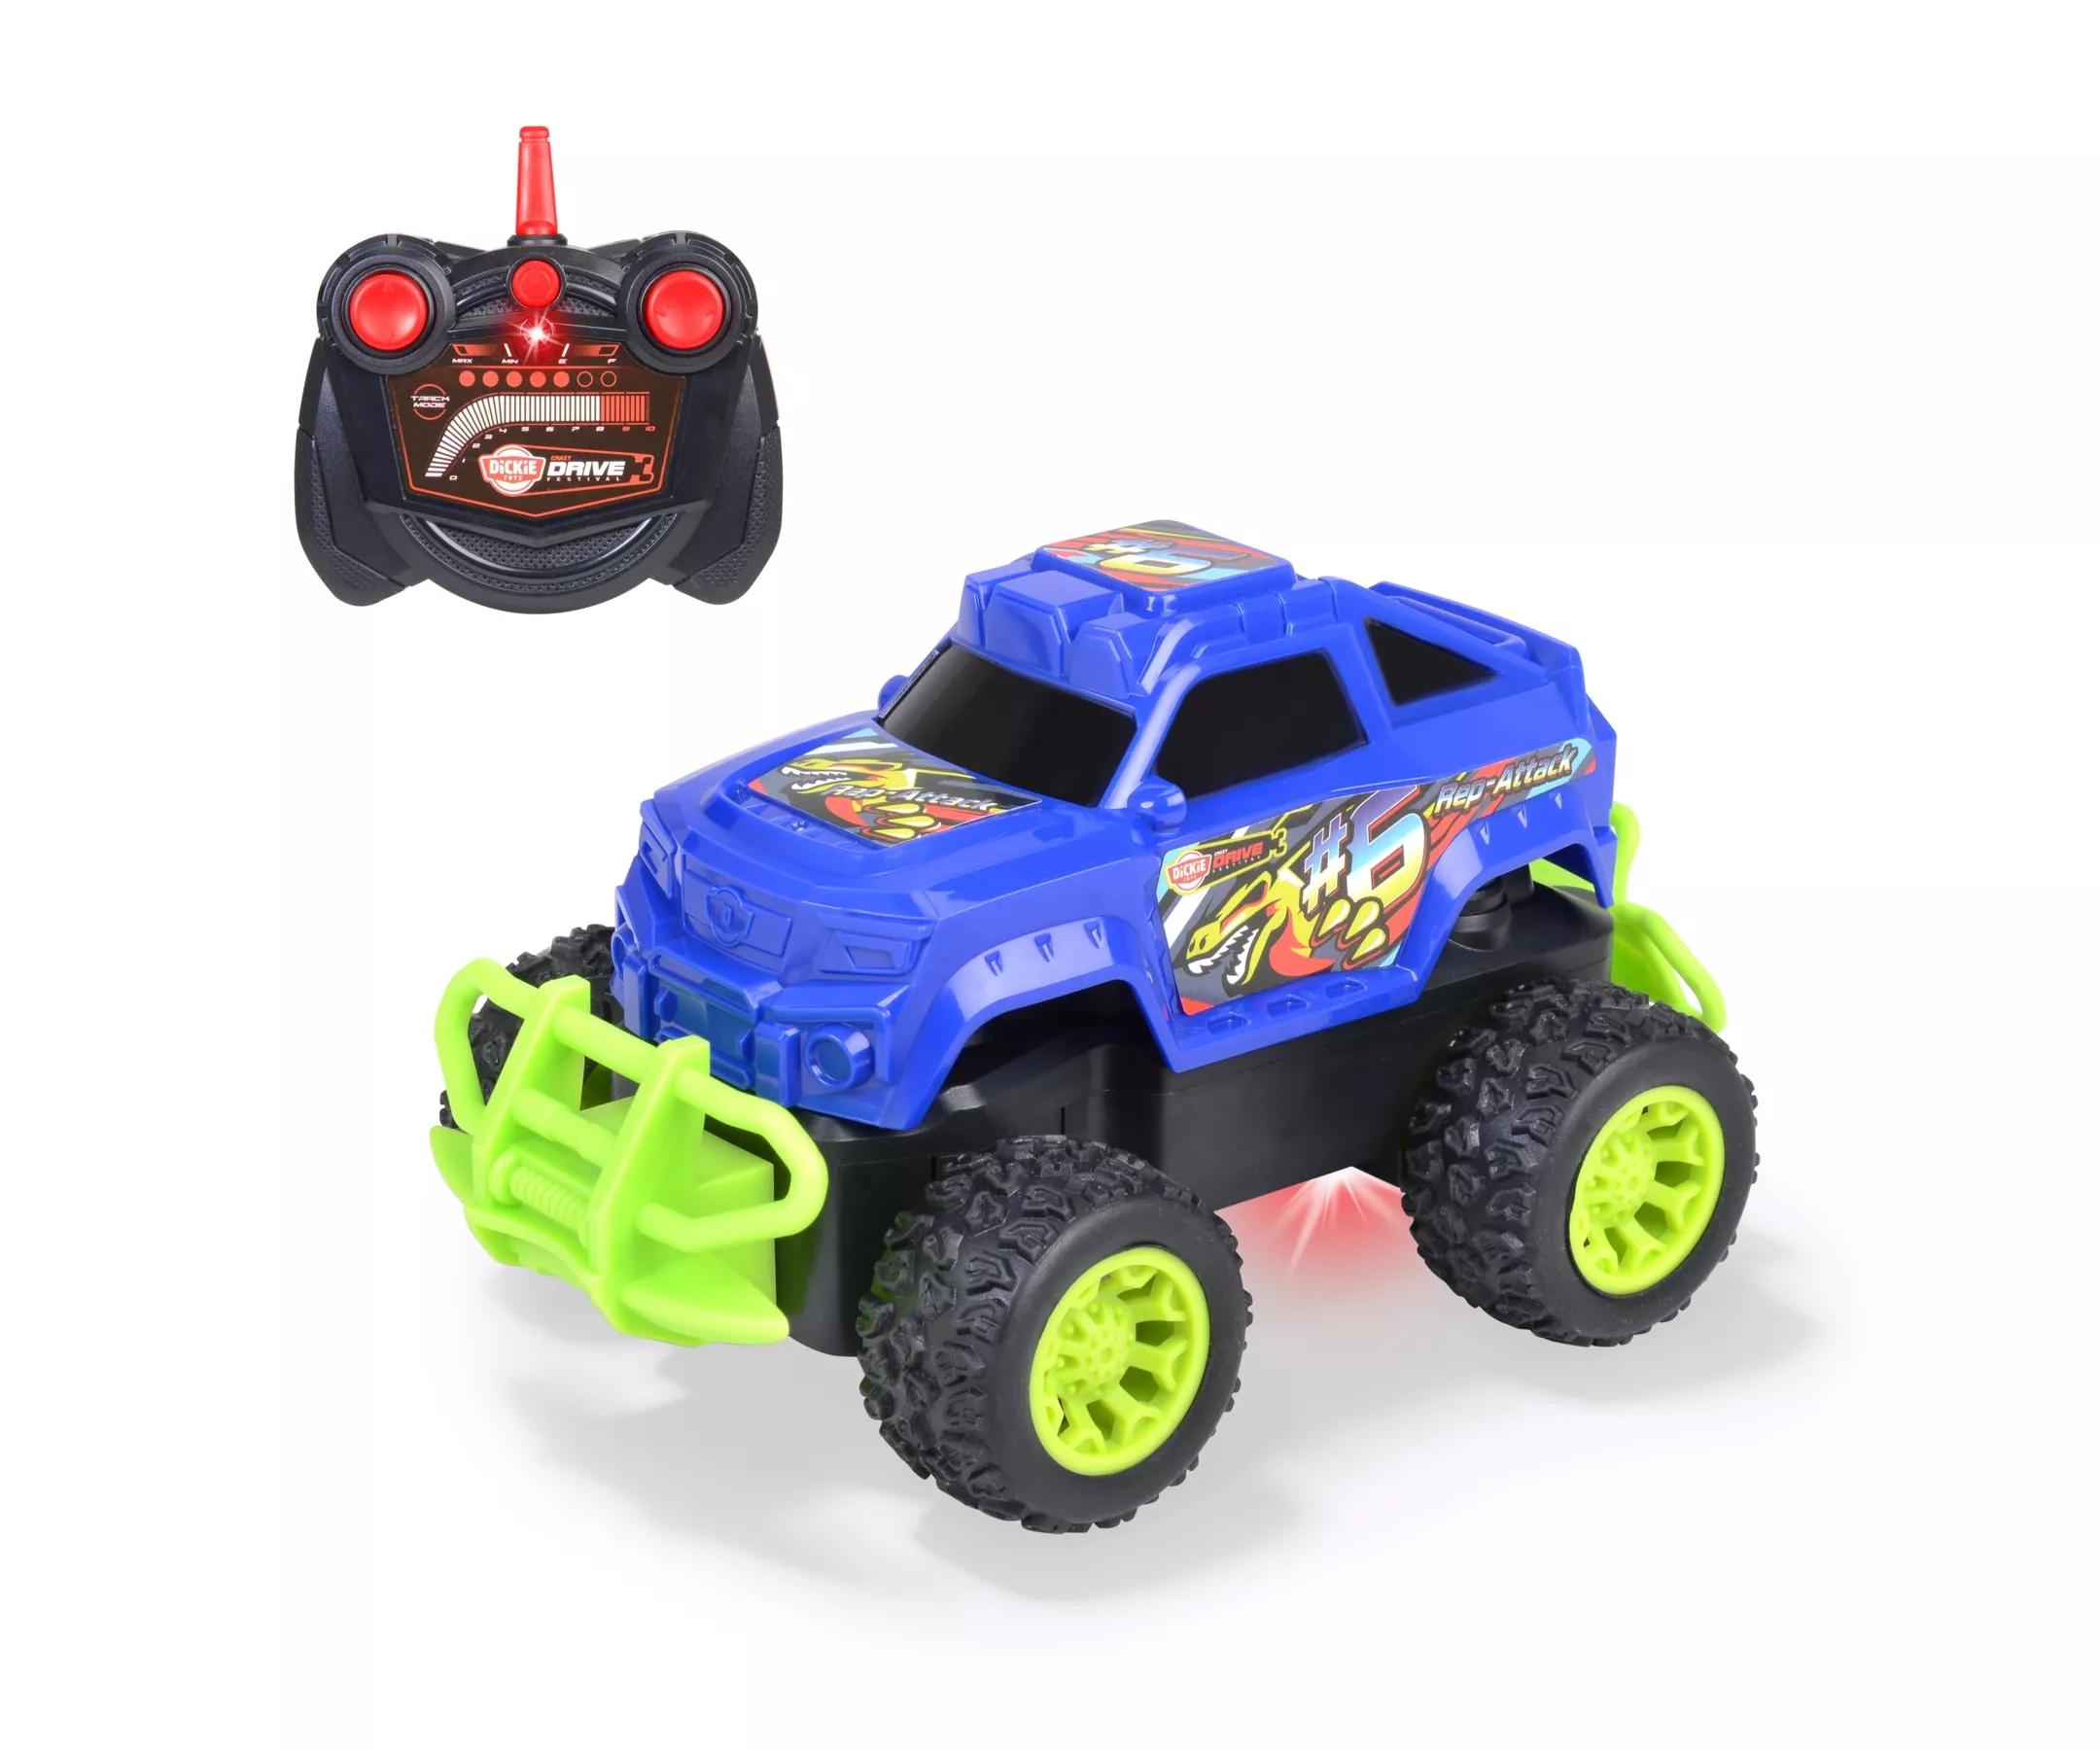 Dickie Toys RC Rep Attack, RTR (201103005)